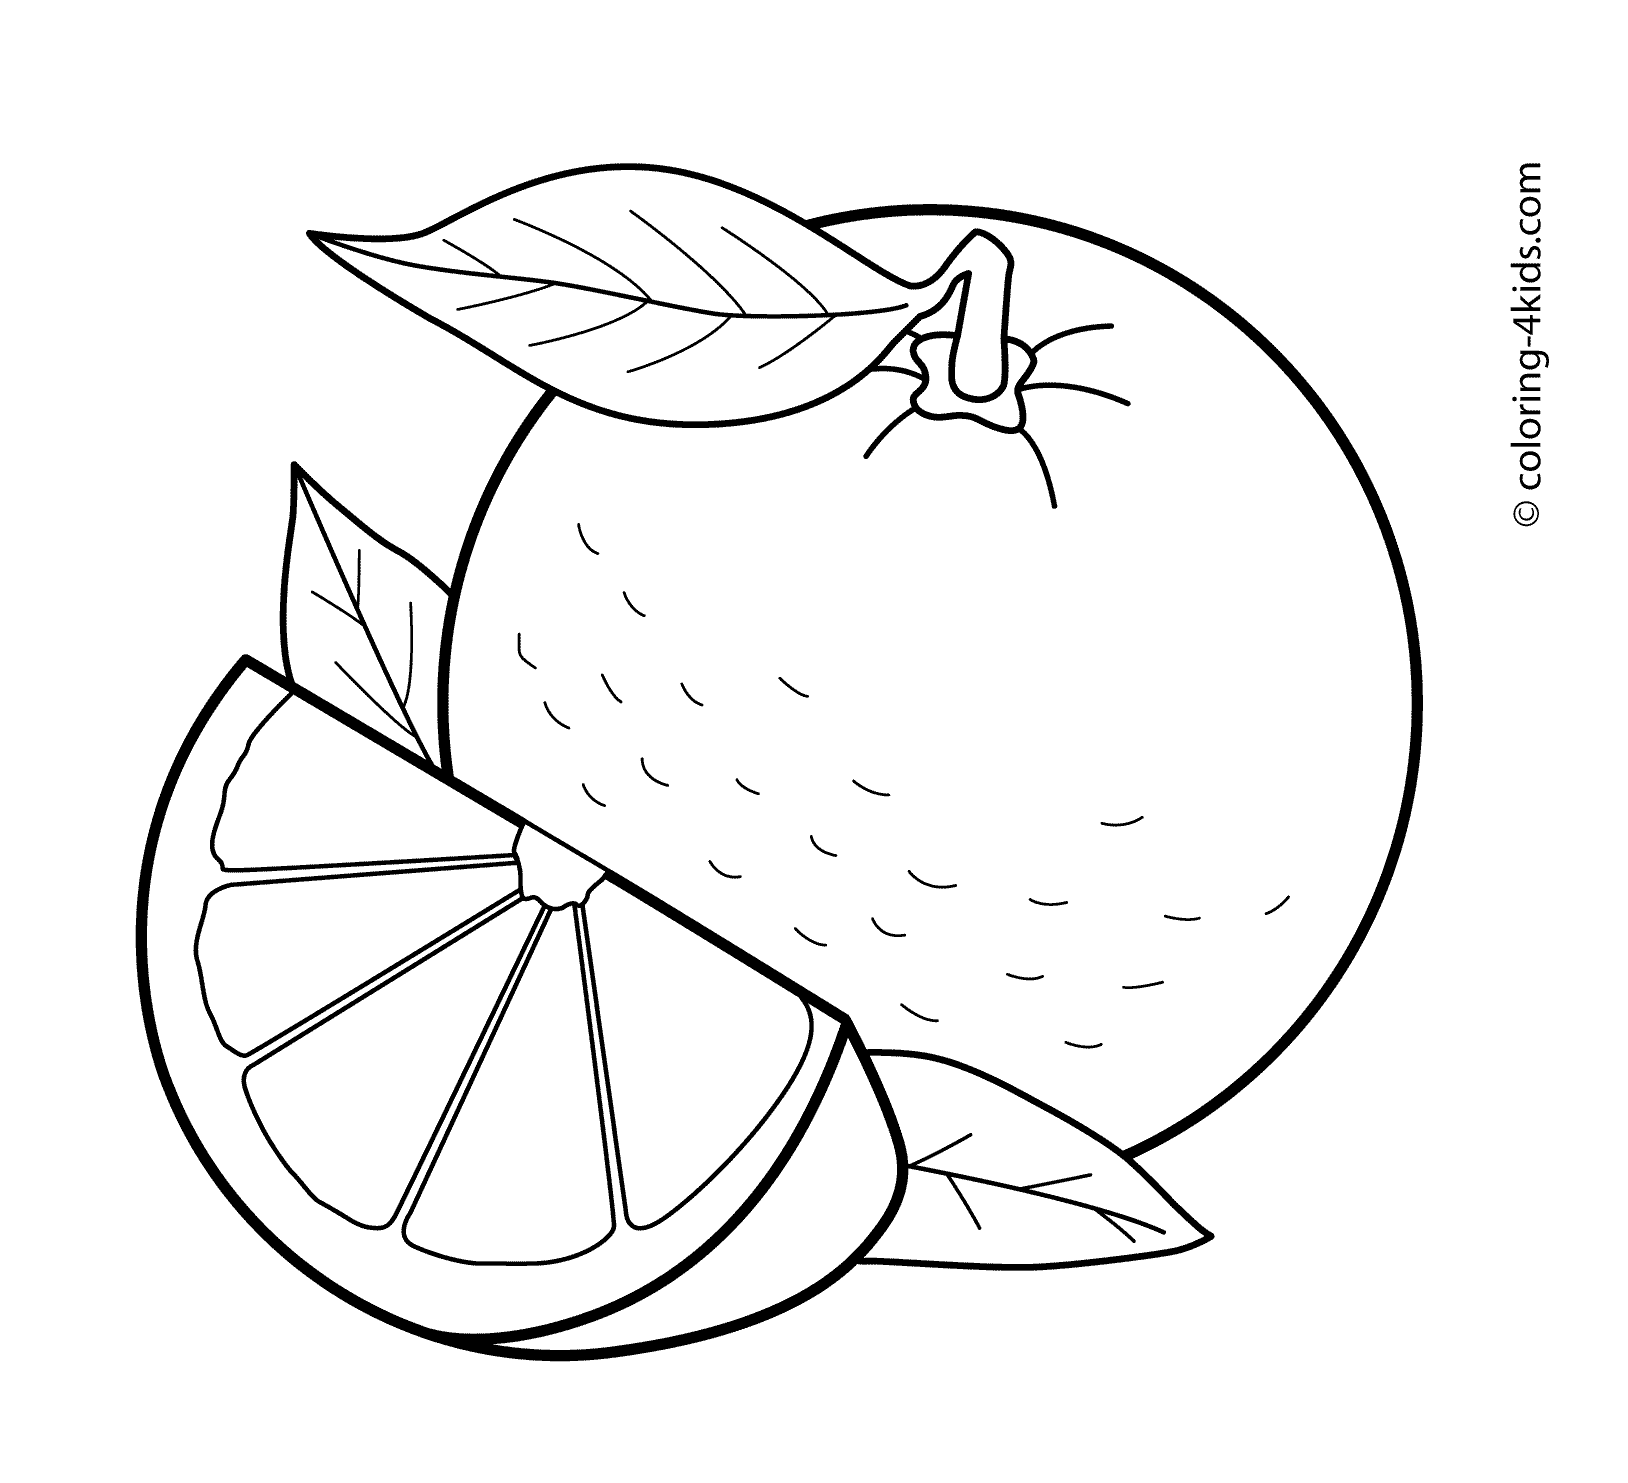 picture of oranges orange coloring pages getcoloringpagescom picture of oranges 